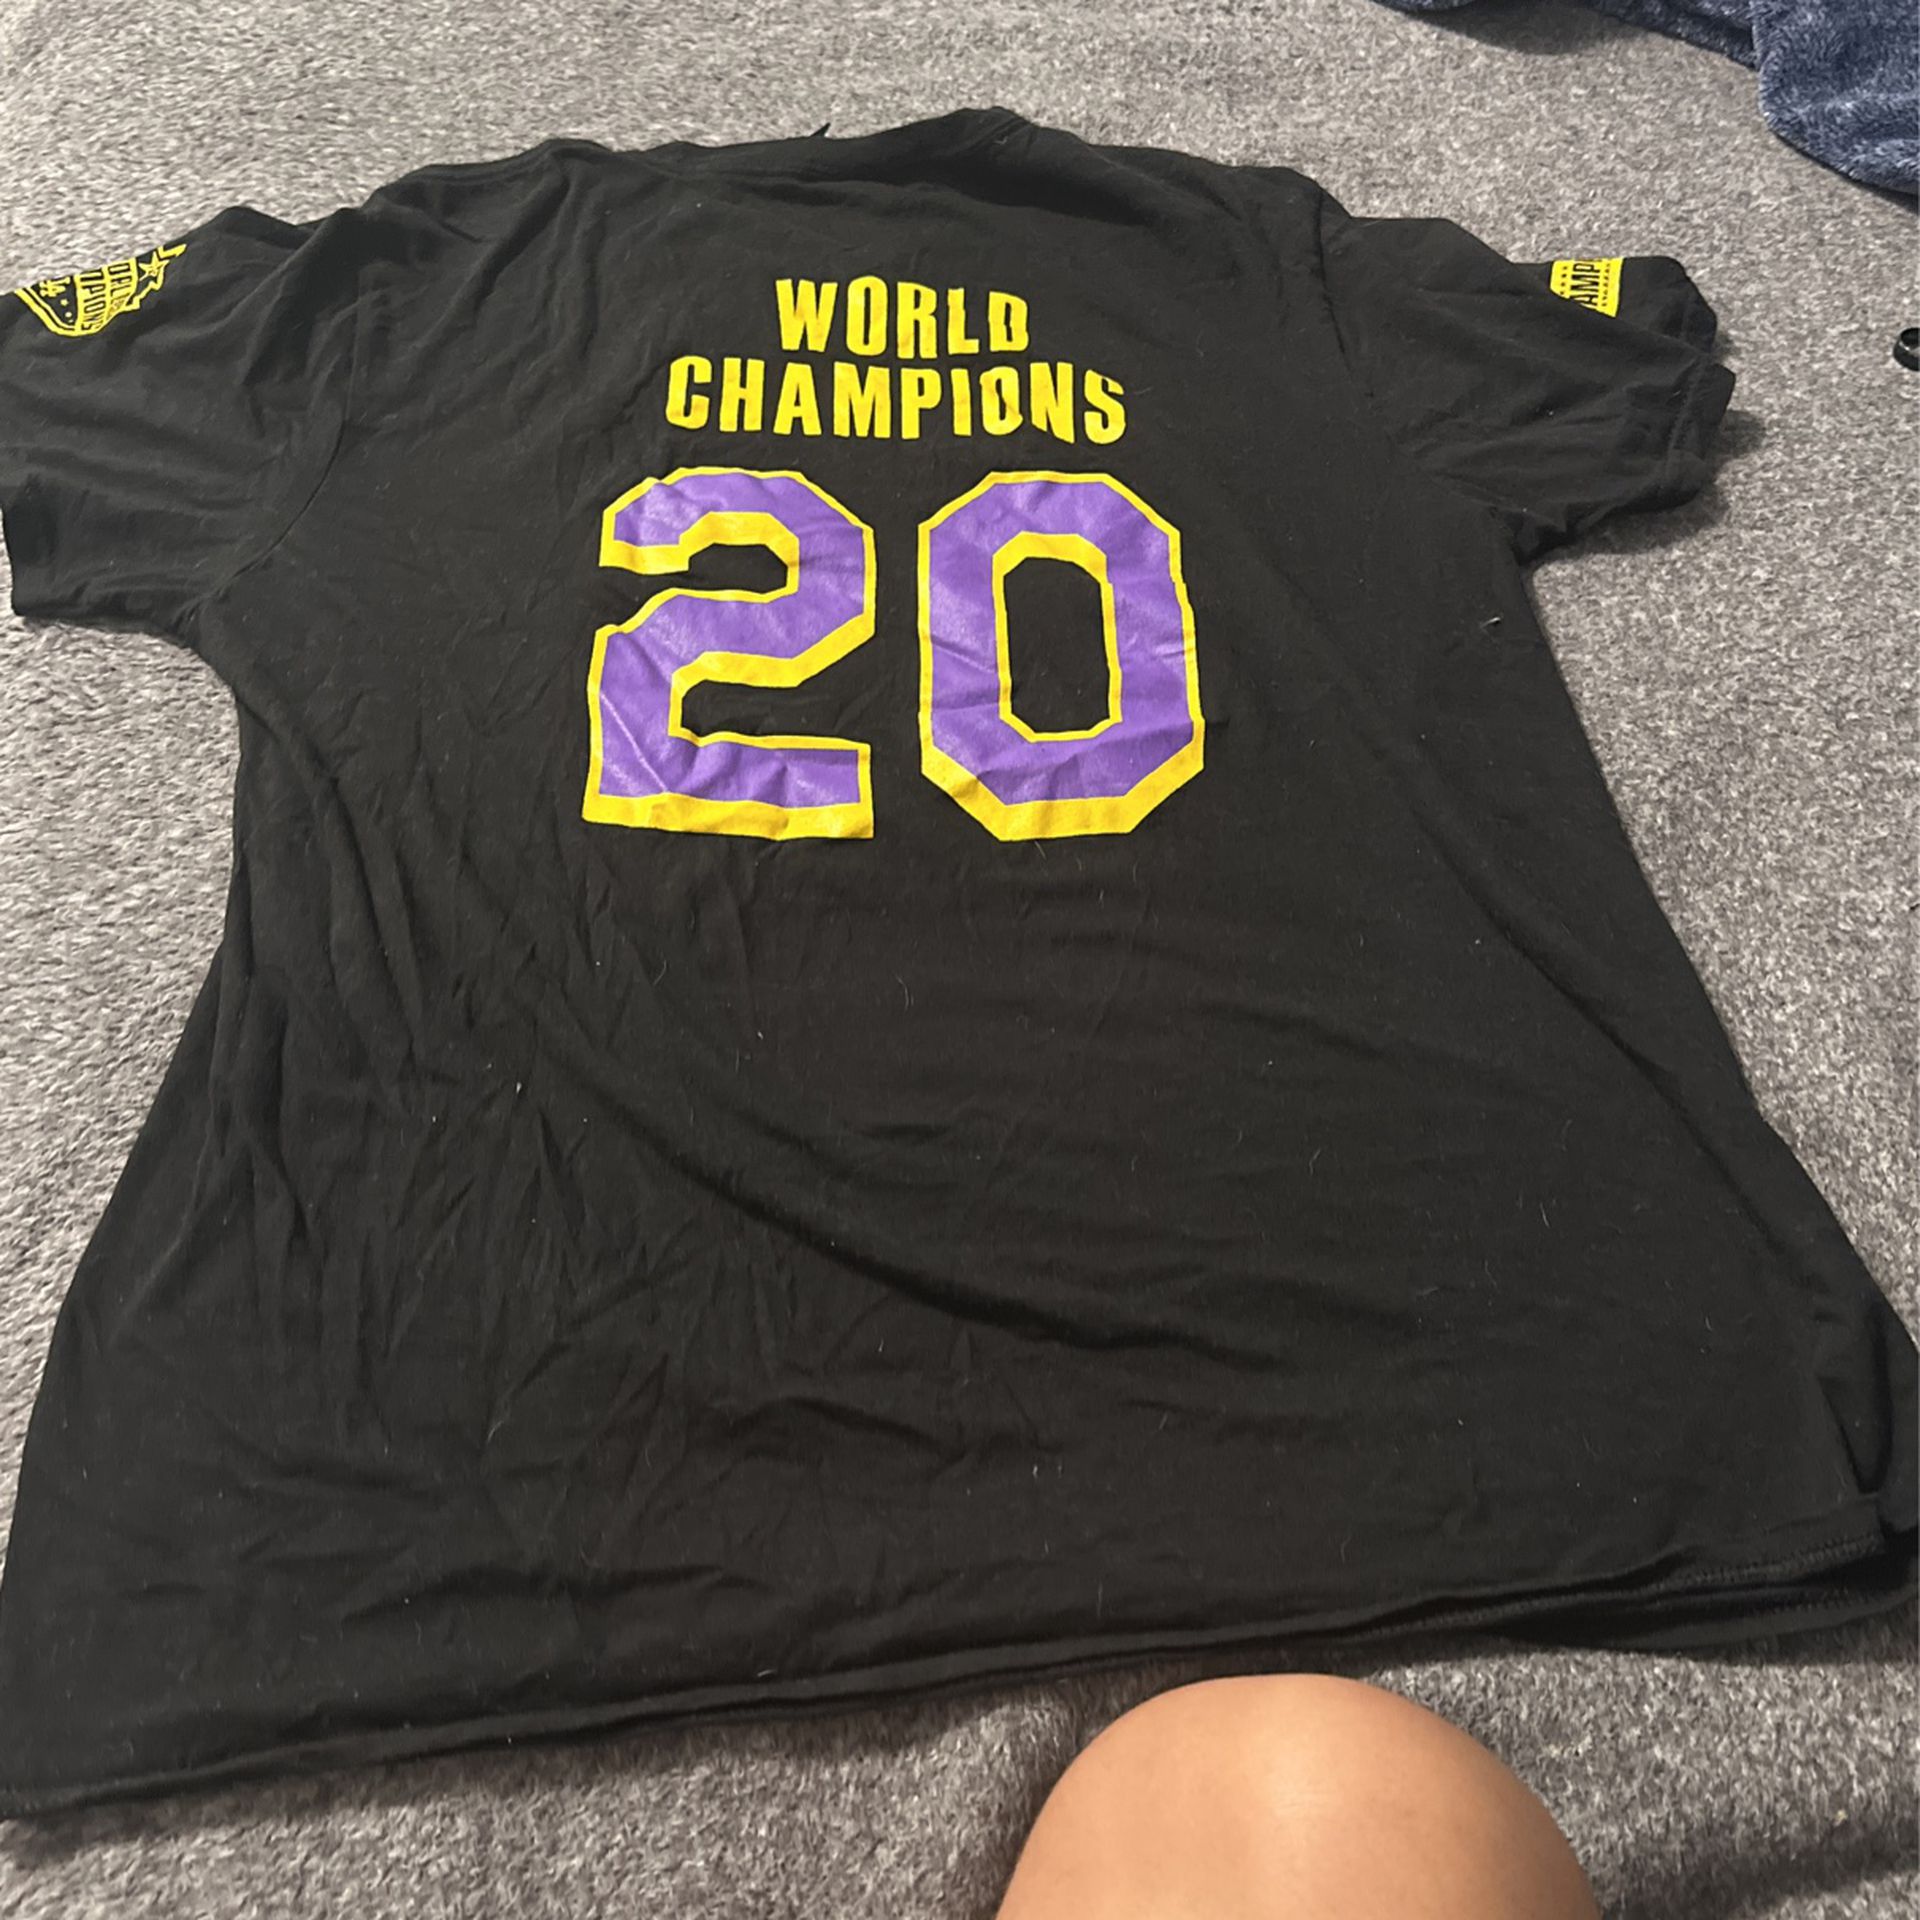 Dodgers/Lakers world champion T shirt for Sale in Montclair, CA - OfferUp